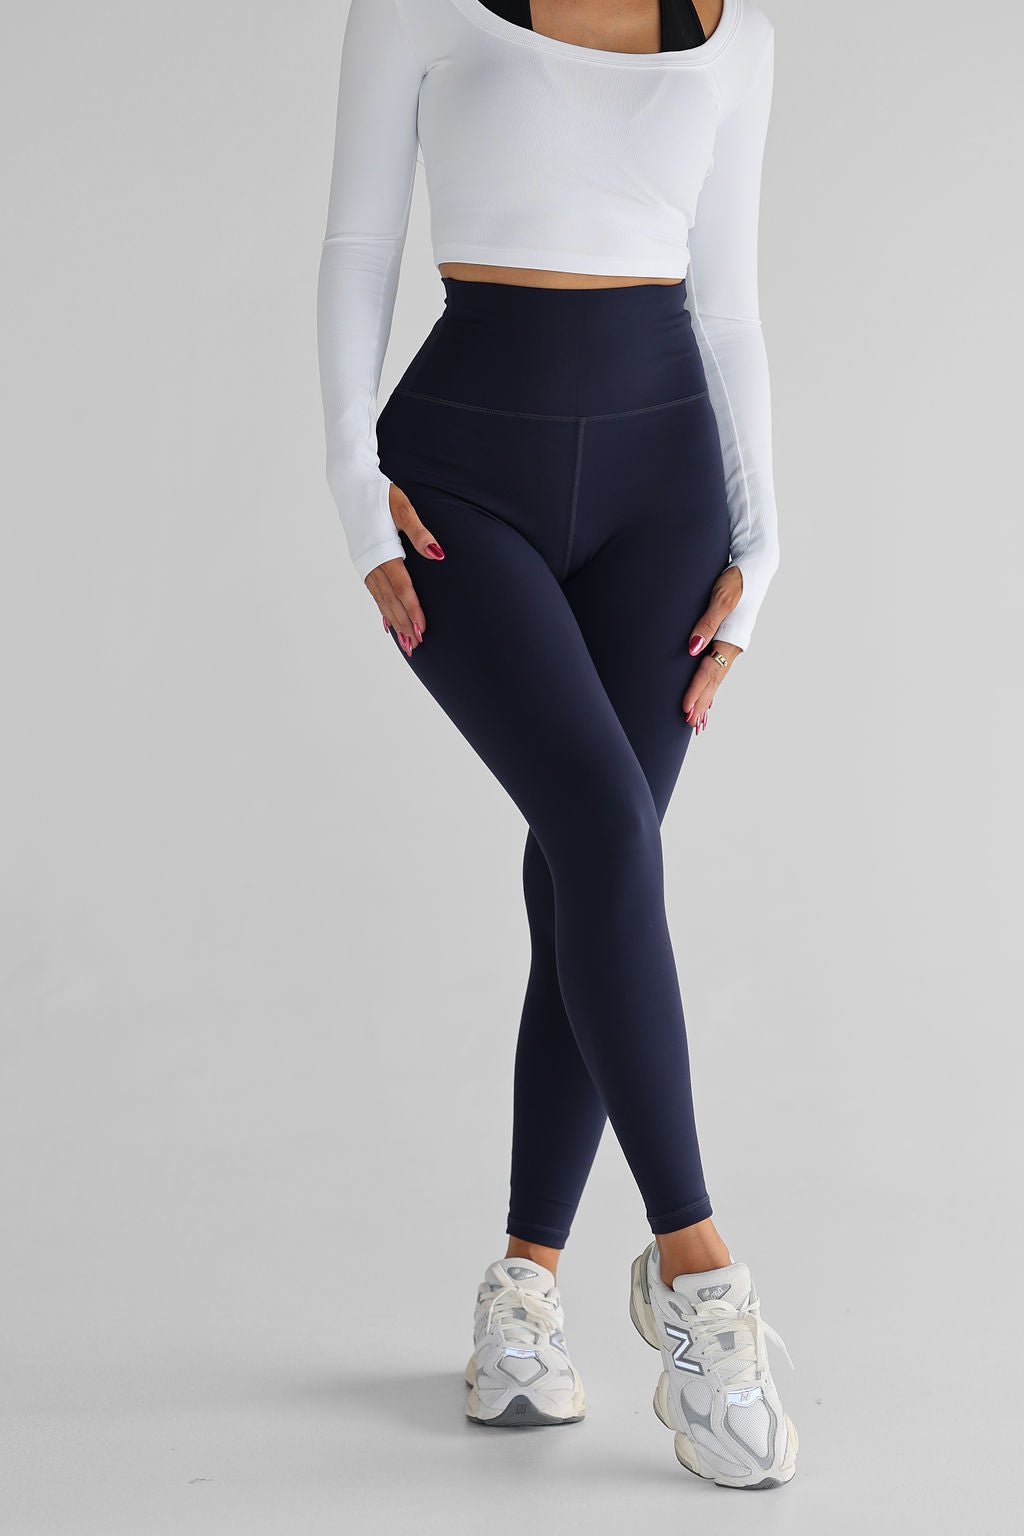 Buy Navy Blue Next Active Sports Tummy Control High Waisted Full Length  Sculpting Leggings from Next Ireland